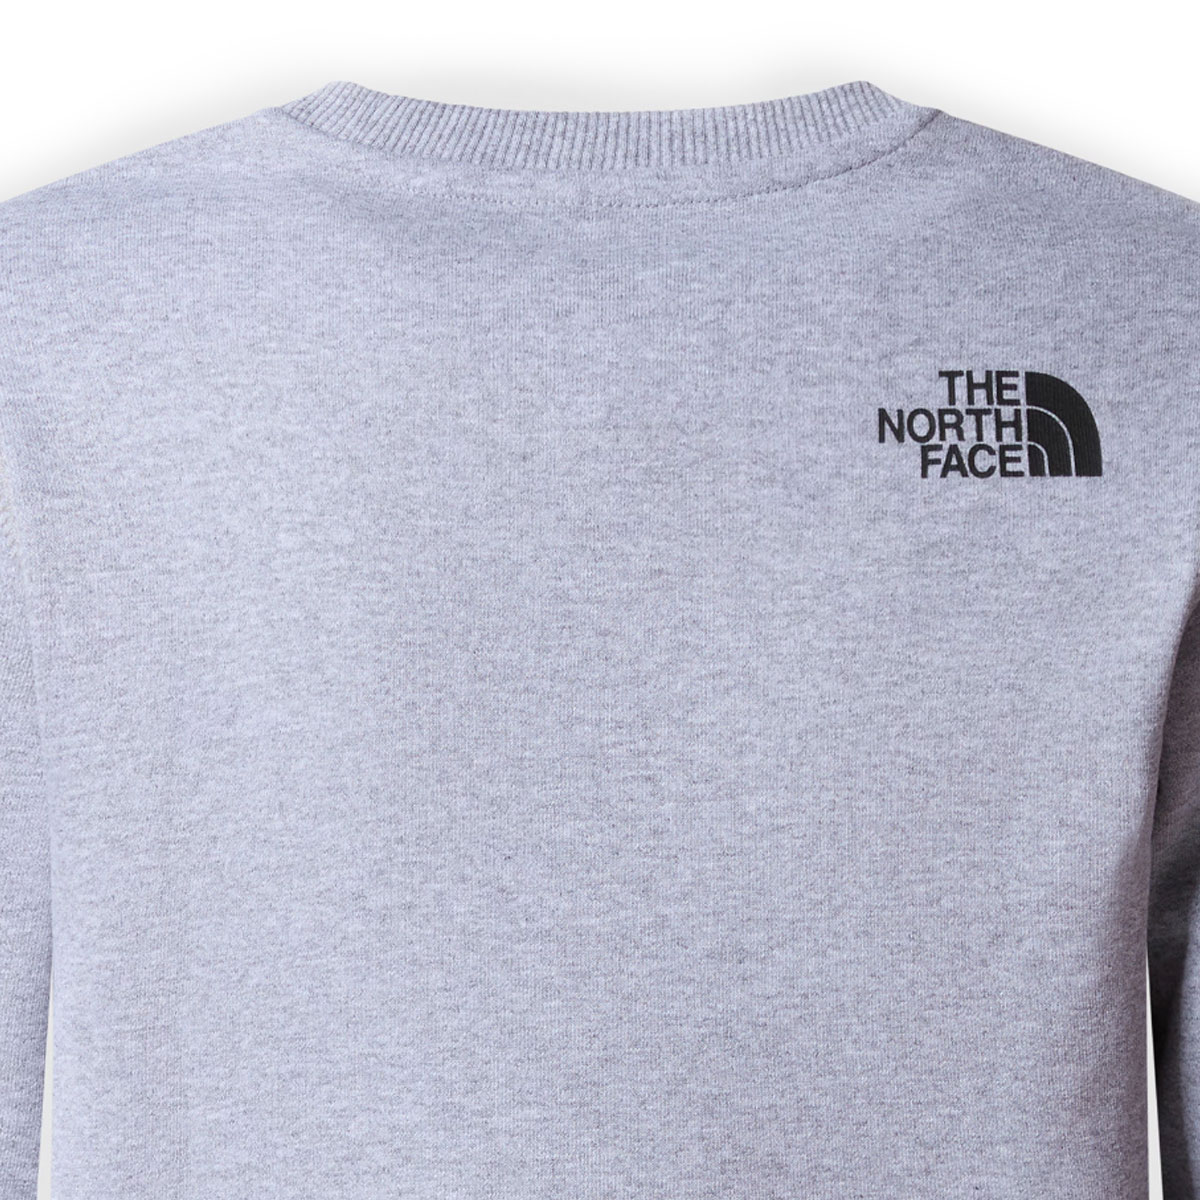 THE NORTH FACE - TEENS' REDBOX SWEATER